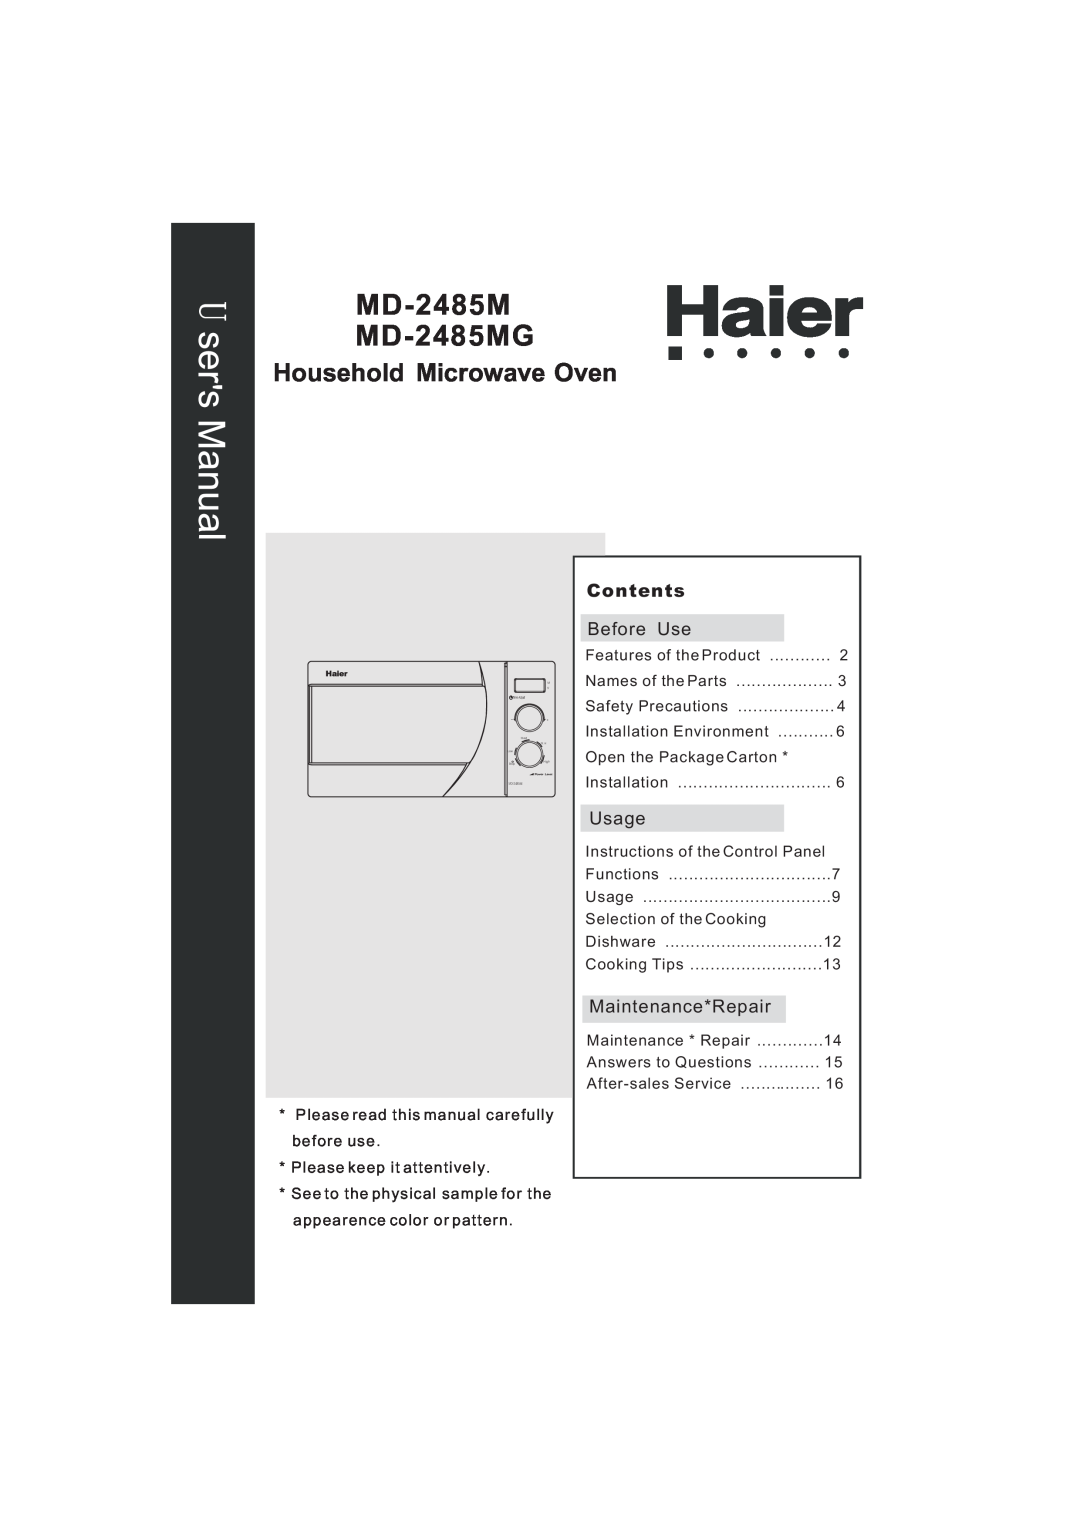 Haier manual MD-2485M MD-2485MG, Household Microwave Oven, Contents 